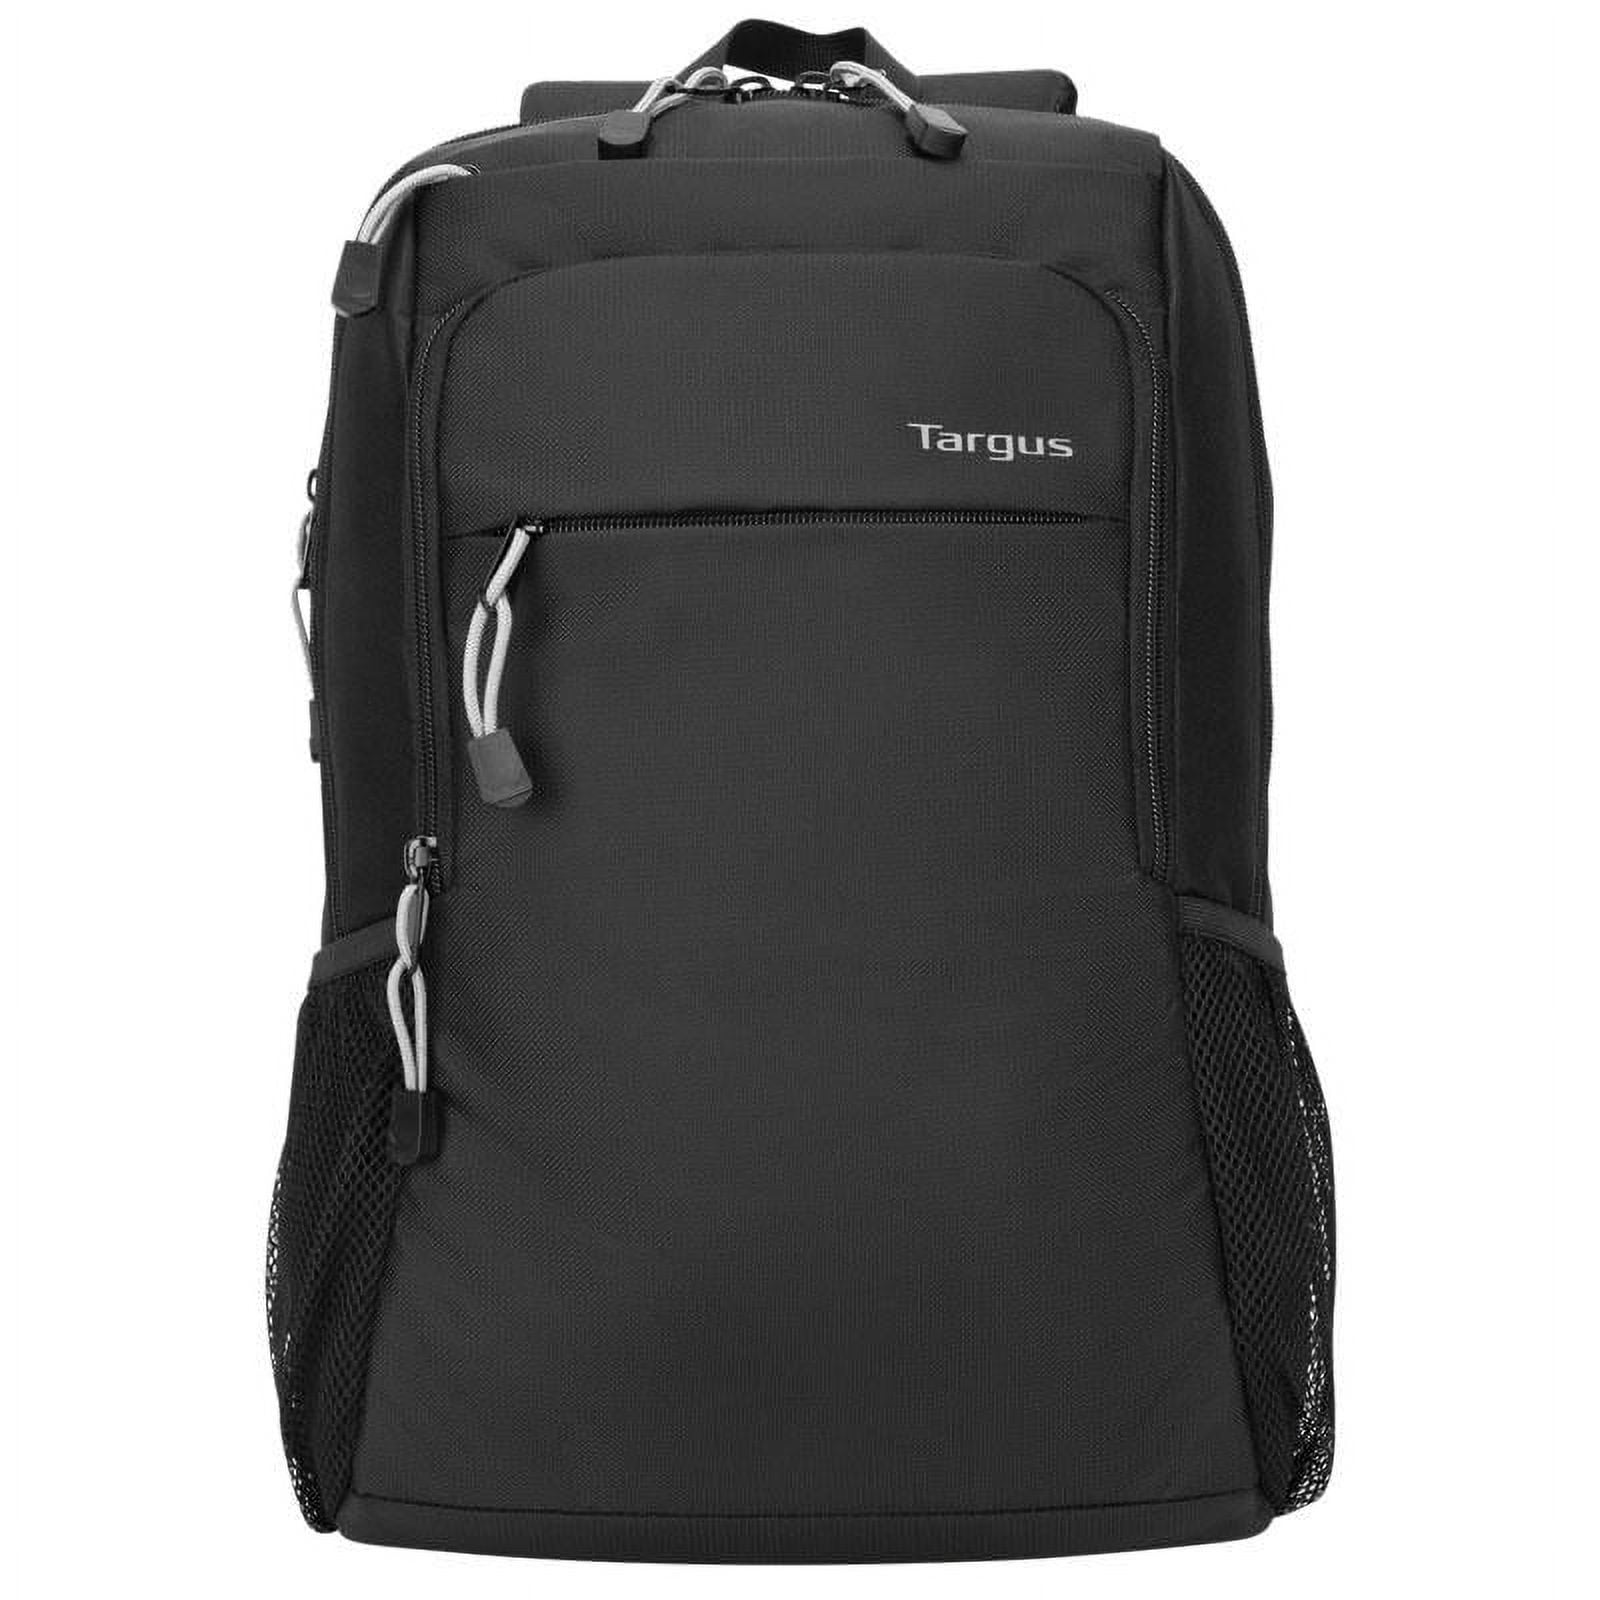 Tsb968gl 15.6 In. Intellect Backpack, Black